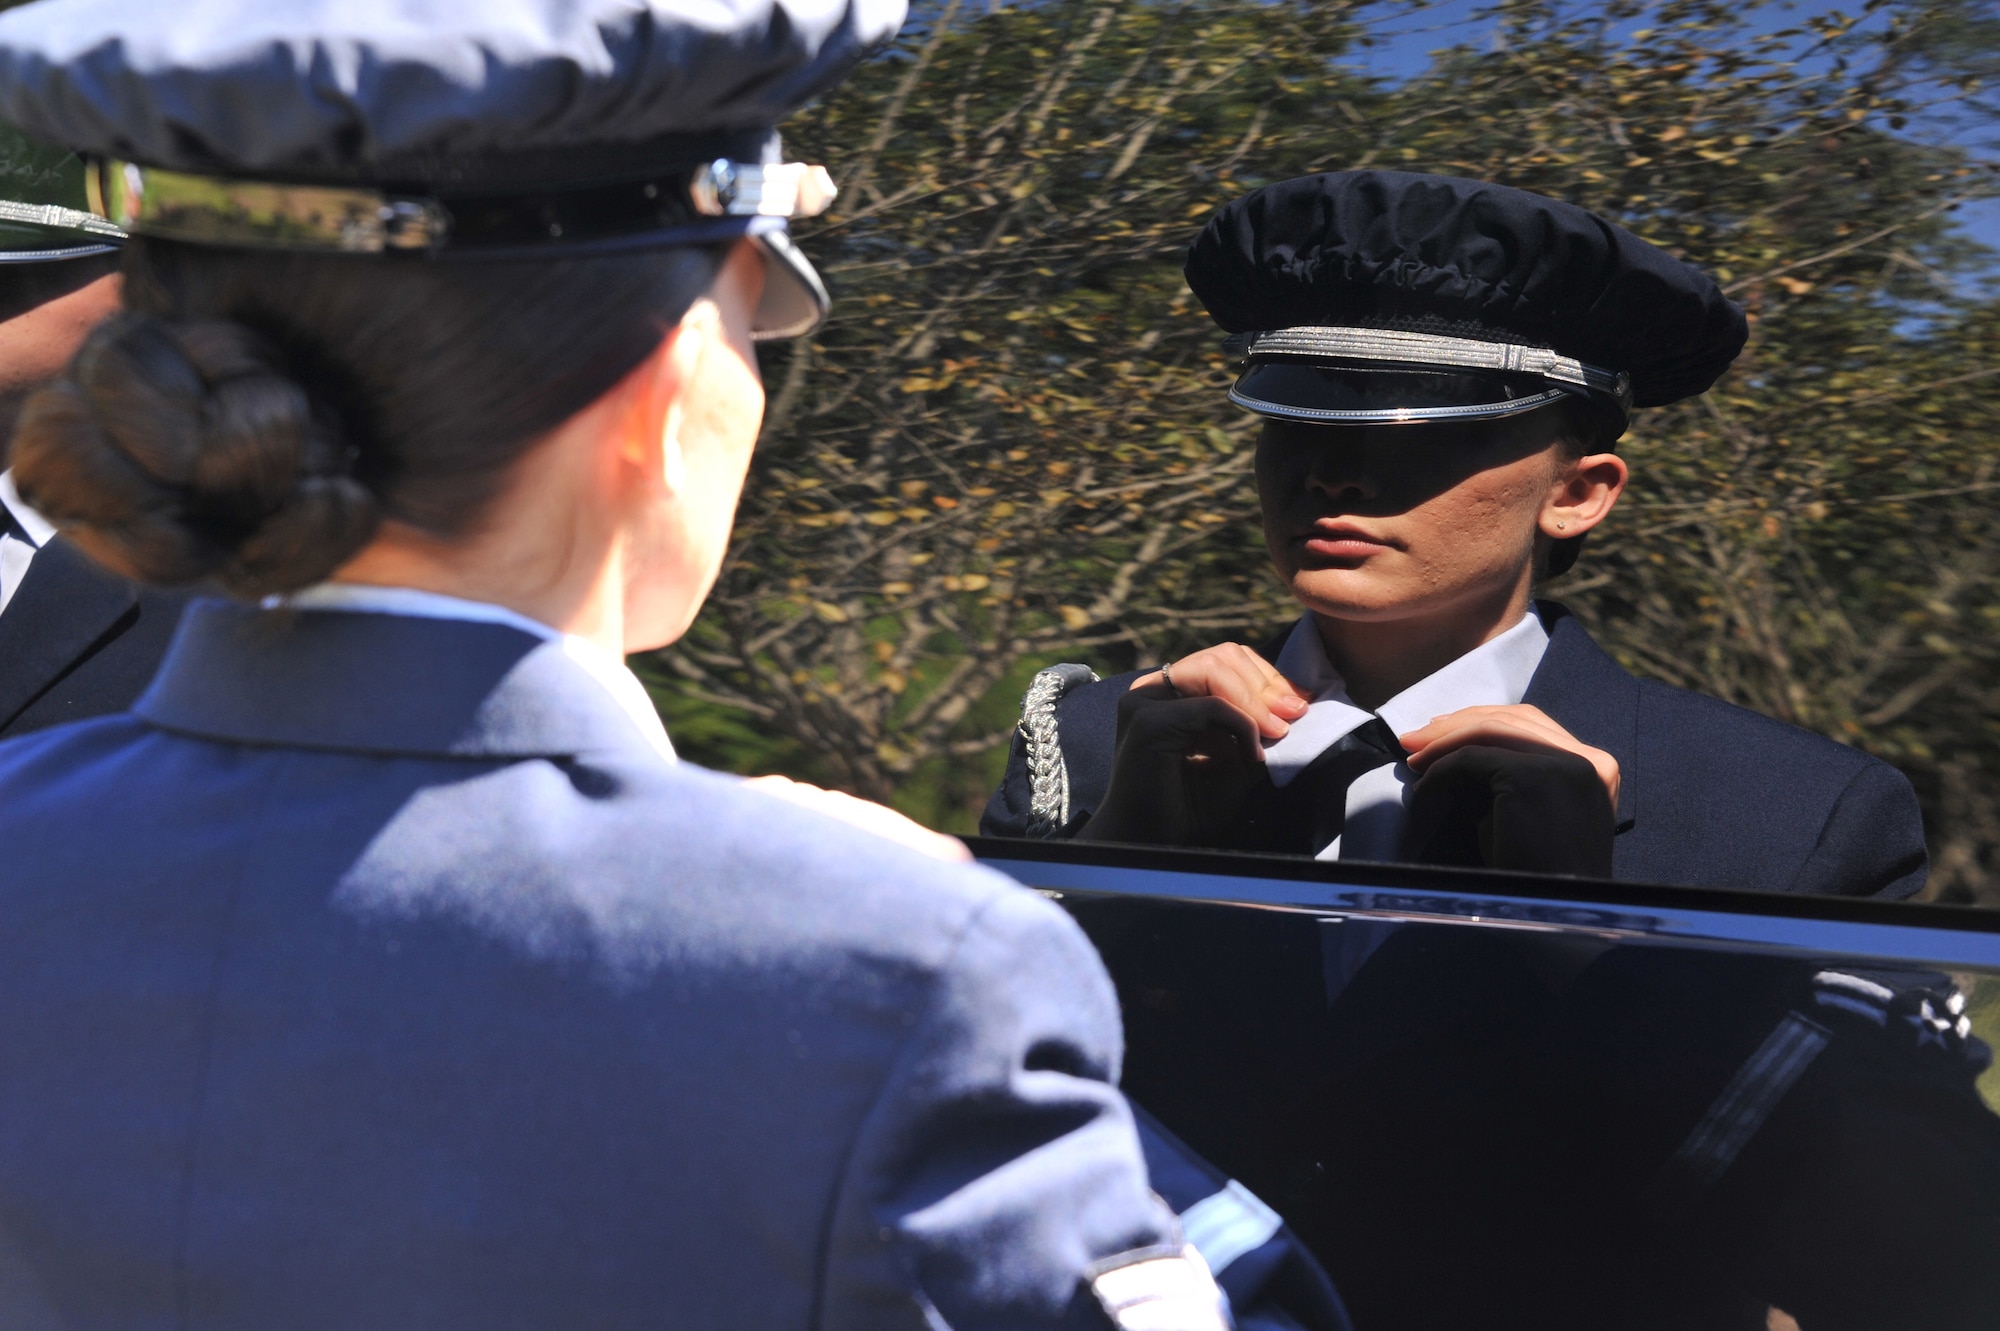 Airman1st Class, Lauren Smith, Maxwell Air Force Base Honor Guard, checks her appearence before a funeral at Alabama National Cemetery, August 22. Maxwell's base honor guard supports requests throughout Alabama and parts of Georgia. (U.S. Air Force photo by Airman 1st Class William Blankenship)